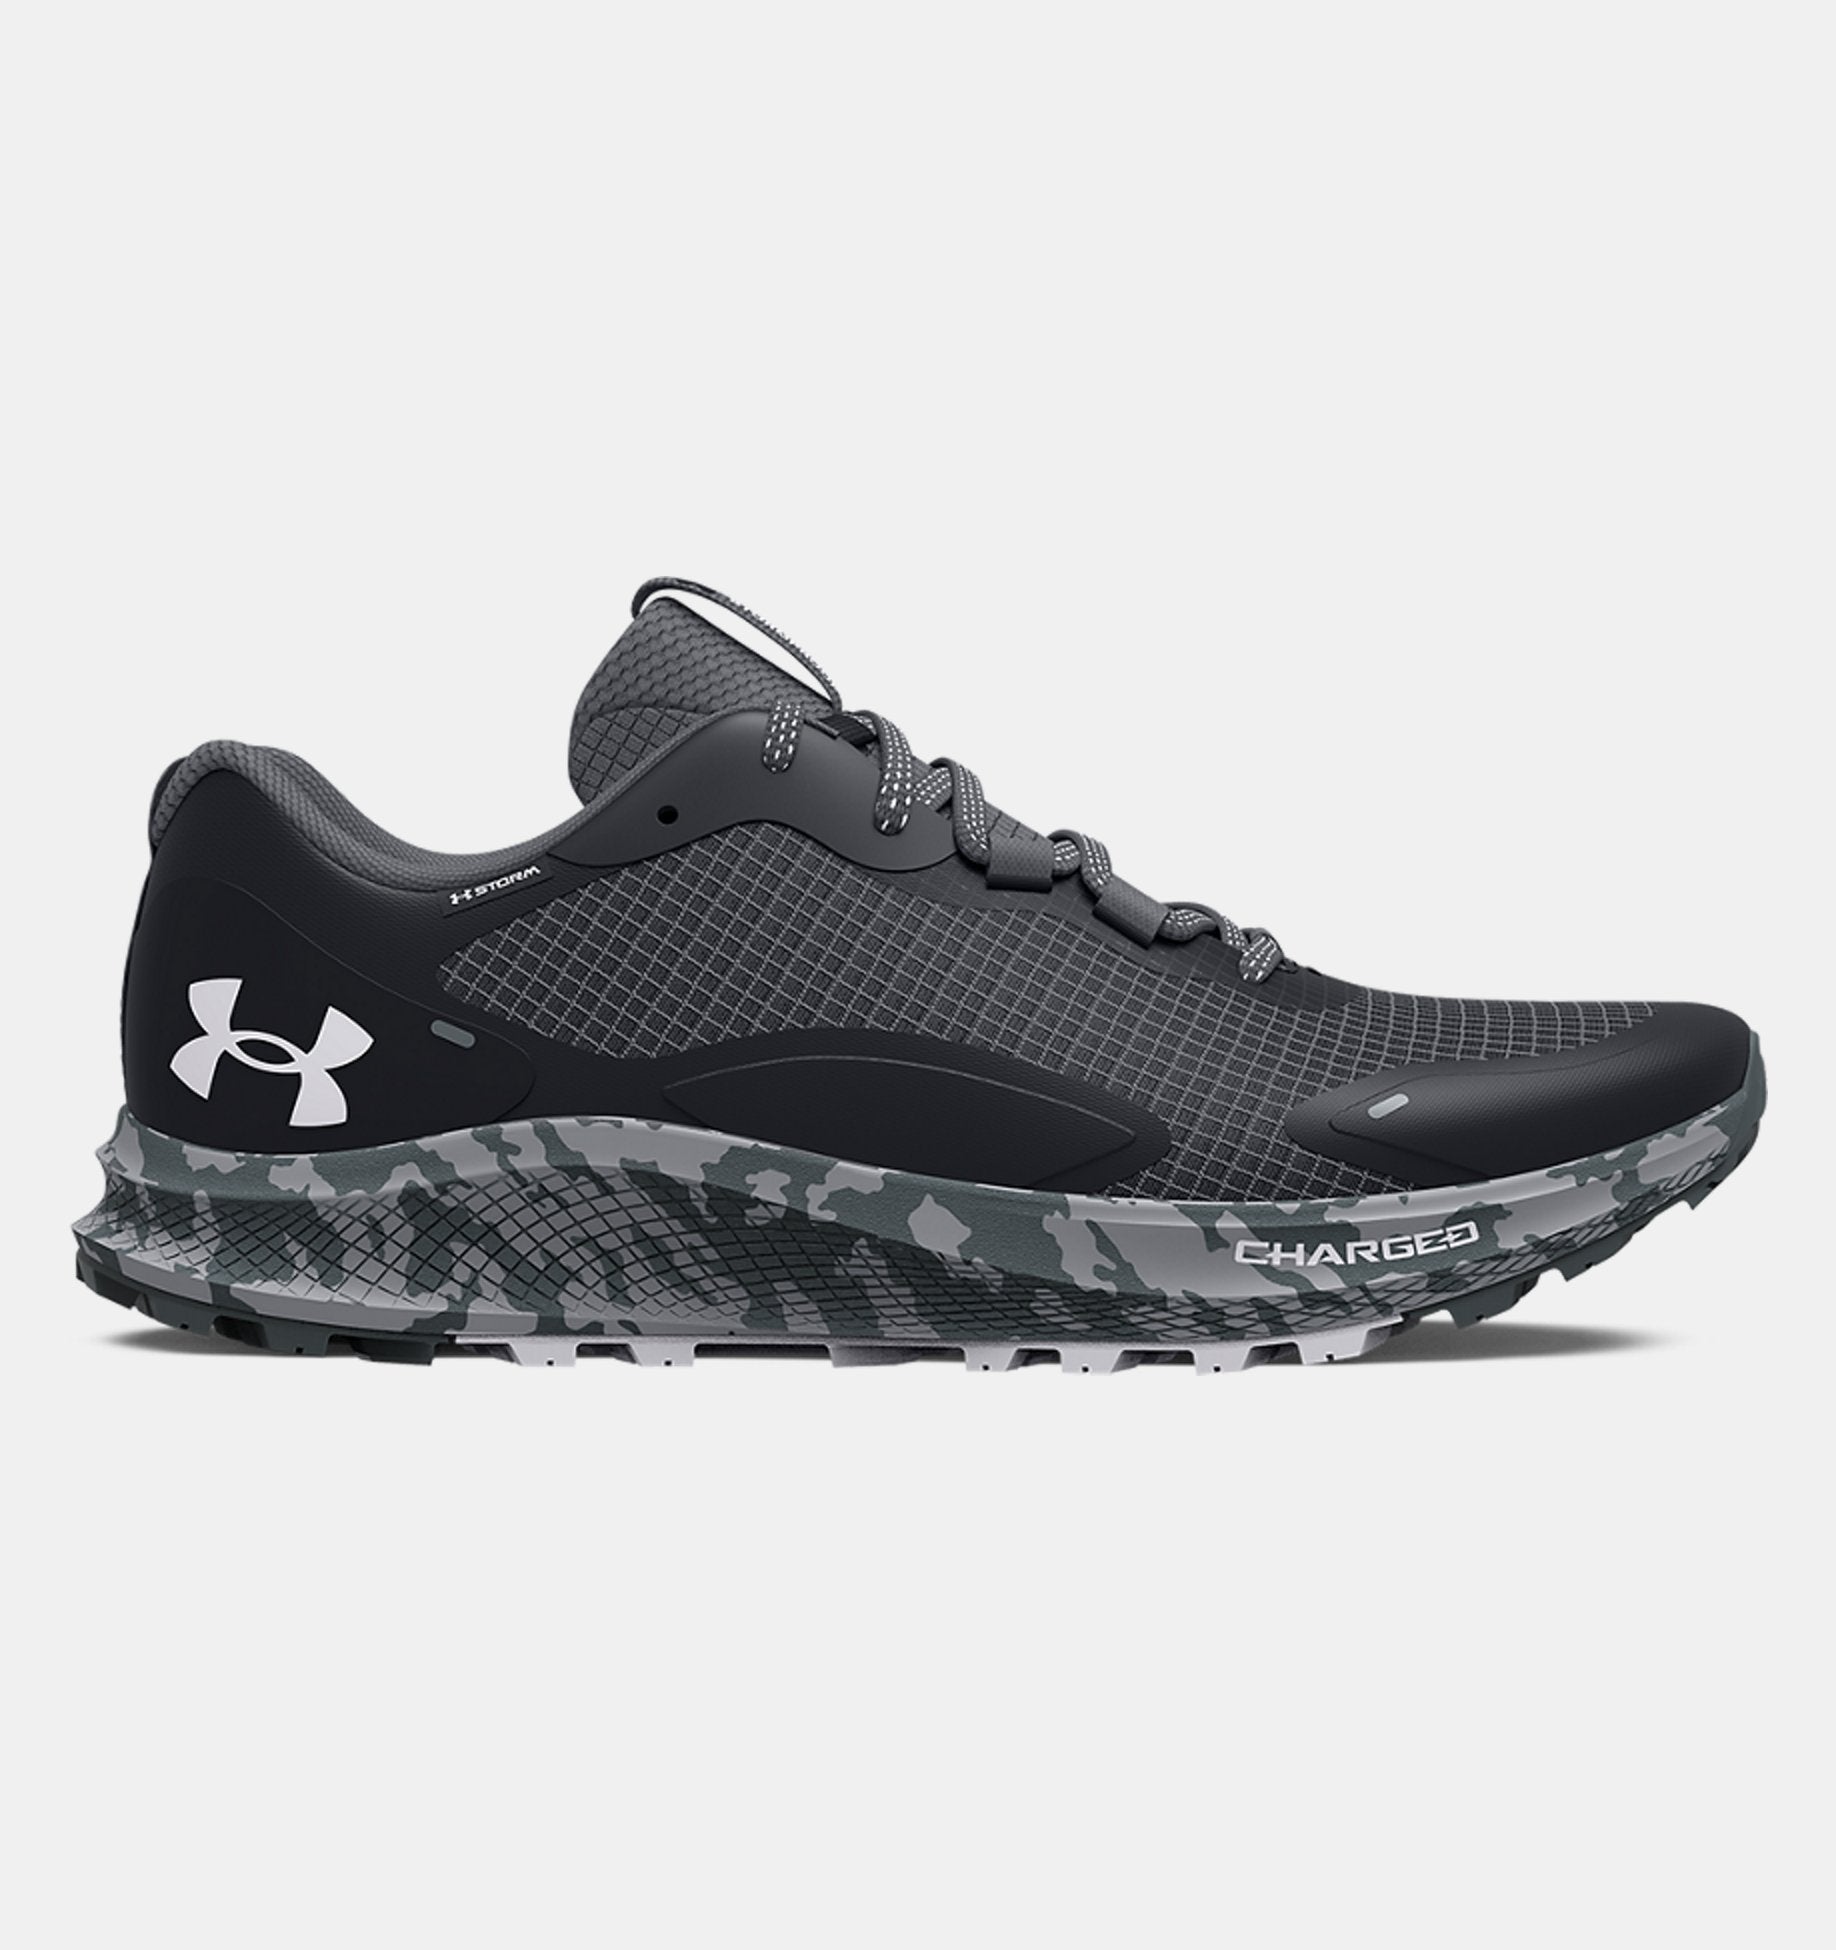 Under Armour Charged Bandit Trail 2 - Mens